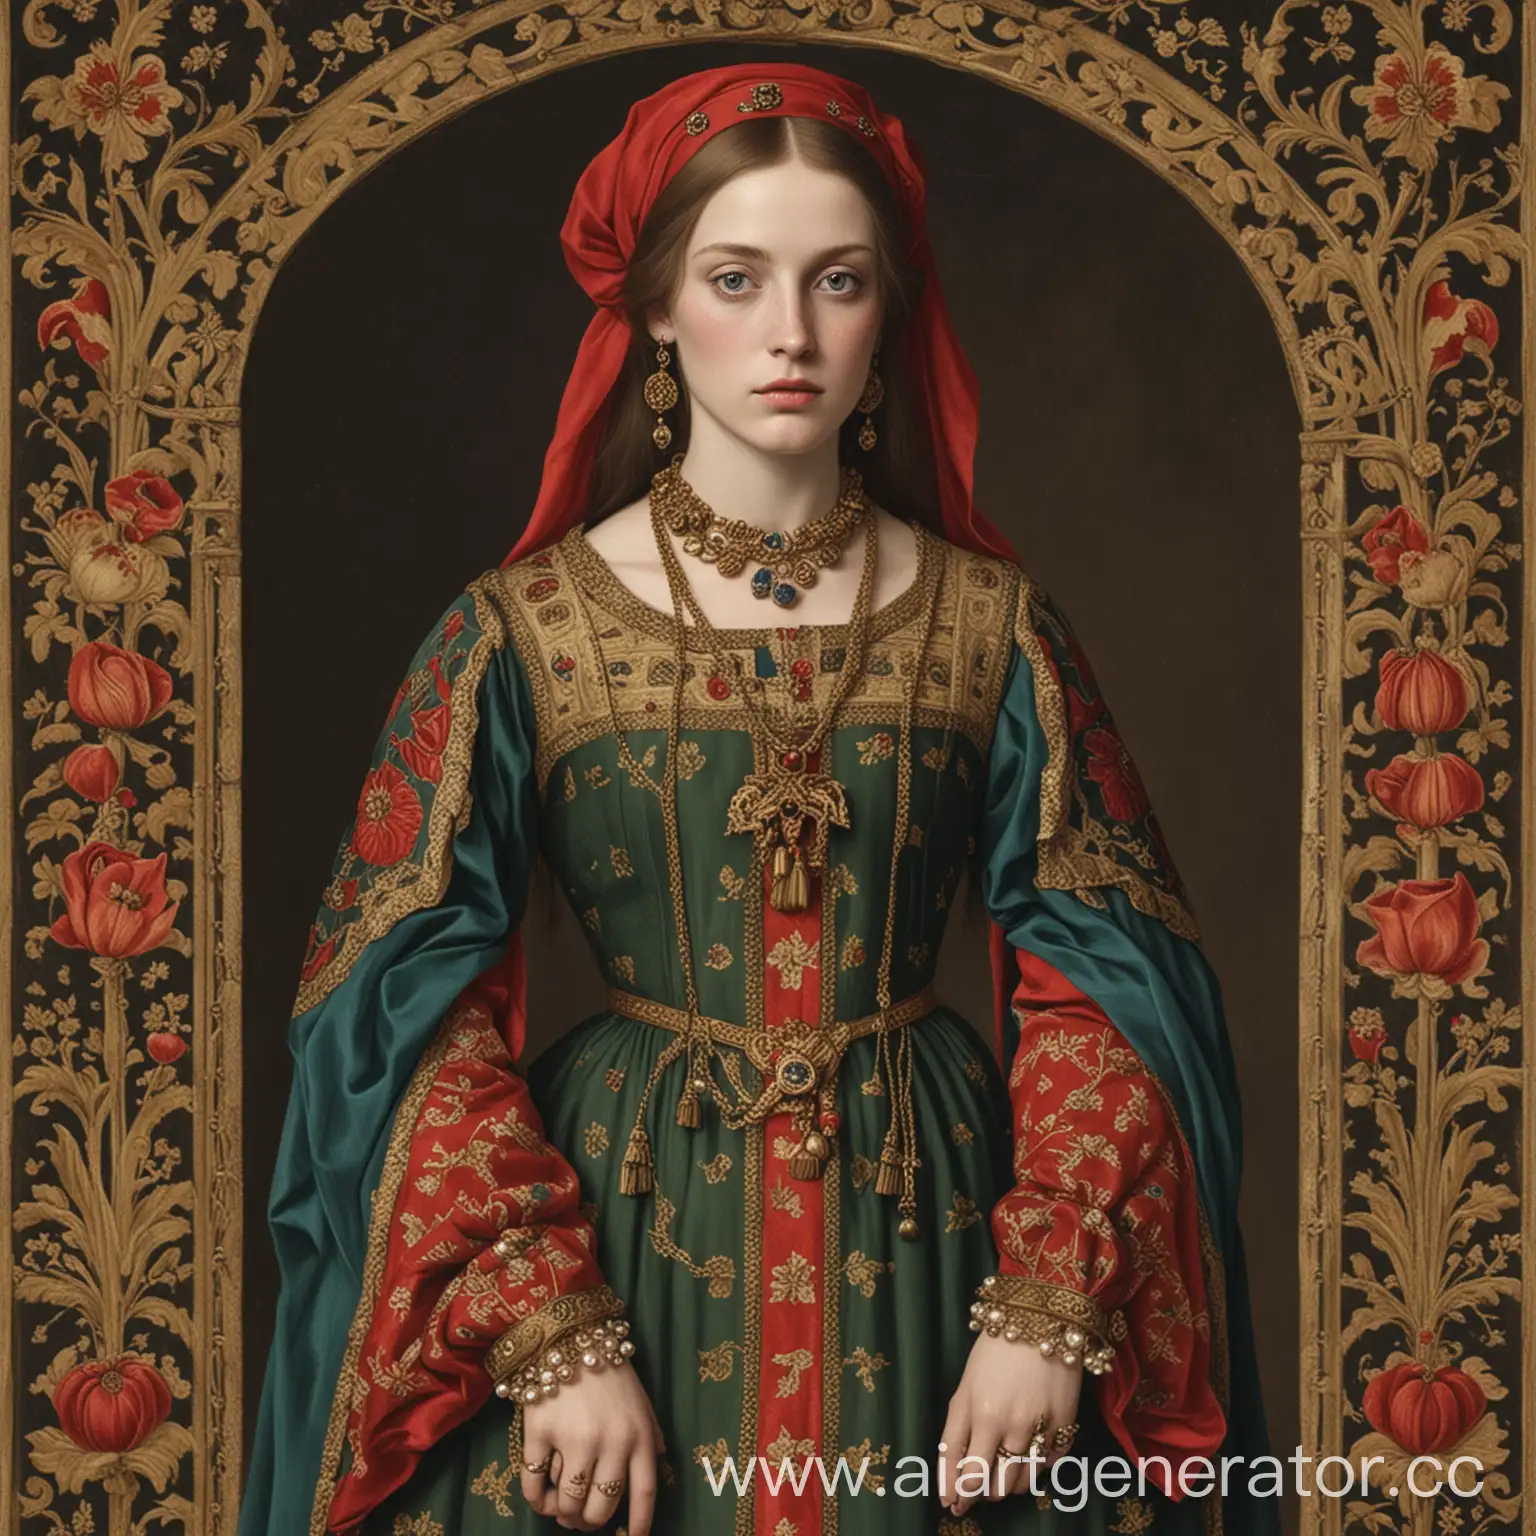 Gucci-Fashion-in-the-Middle-Ages-Opulent-Style-and-Medieval-Glamour